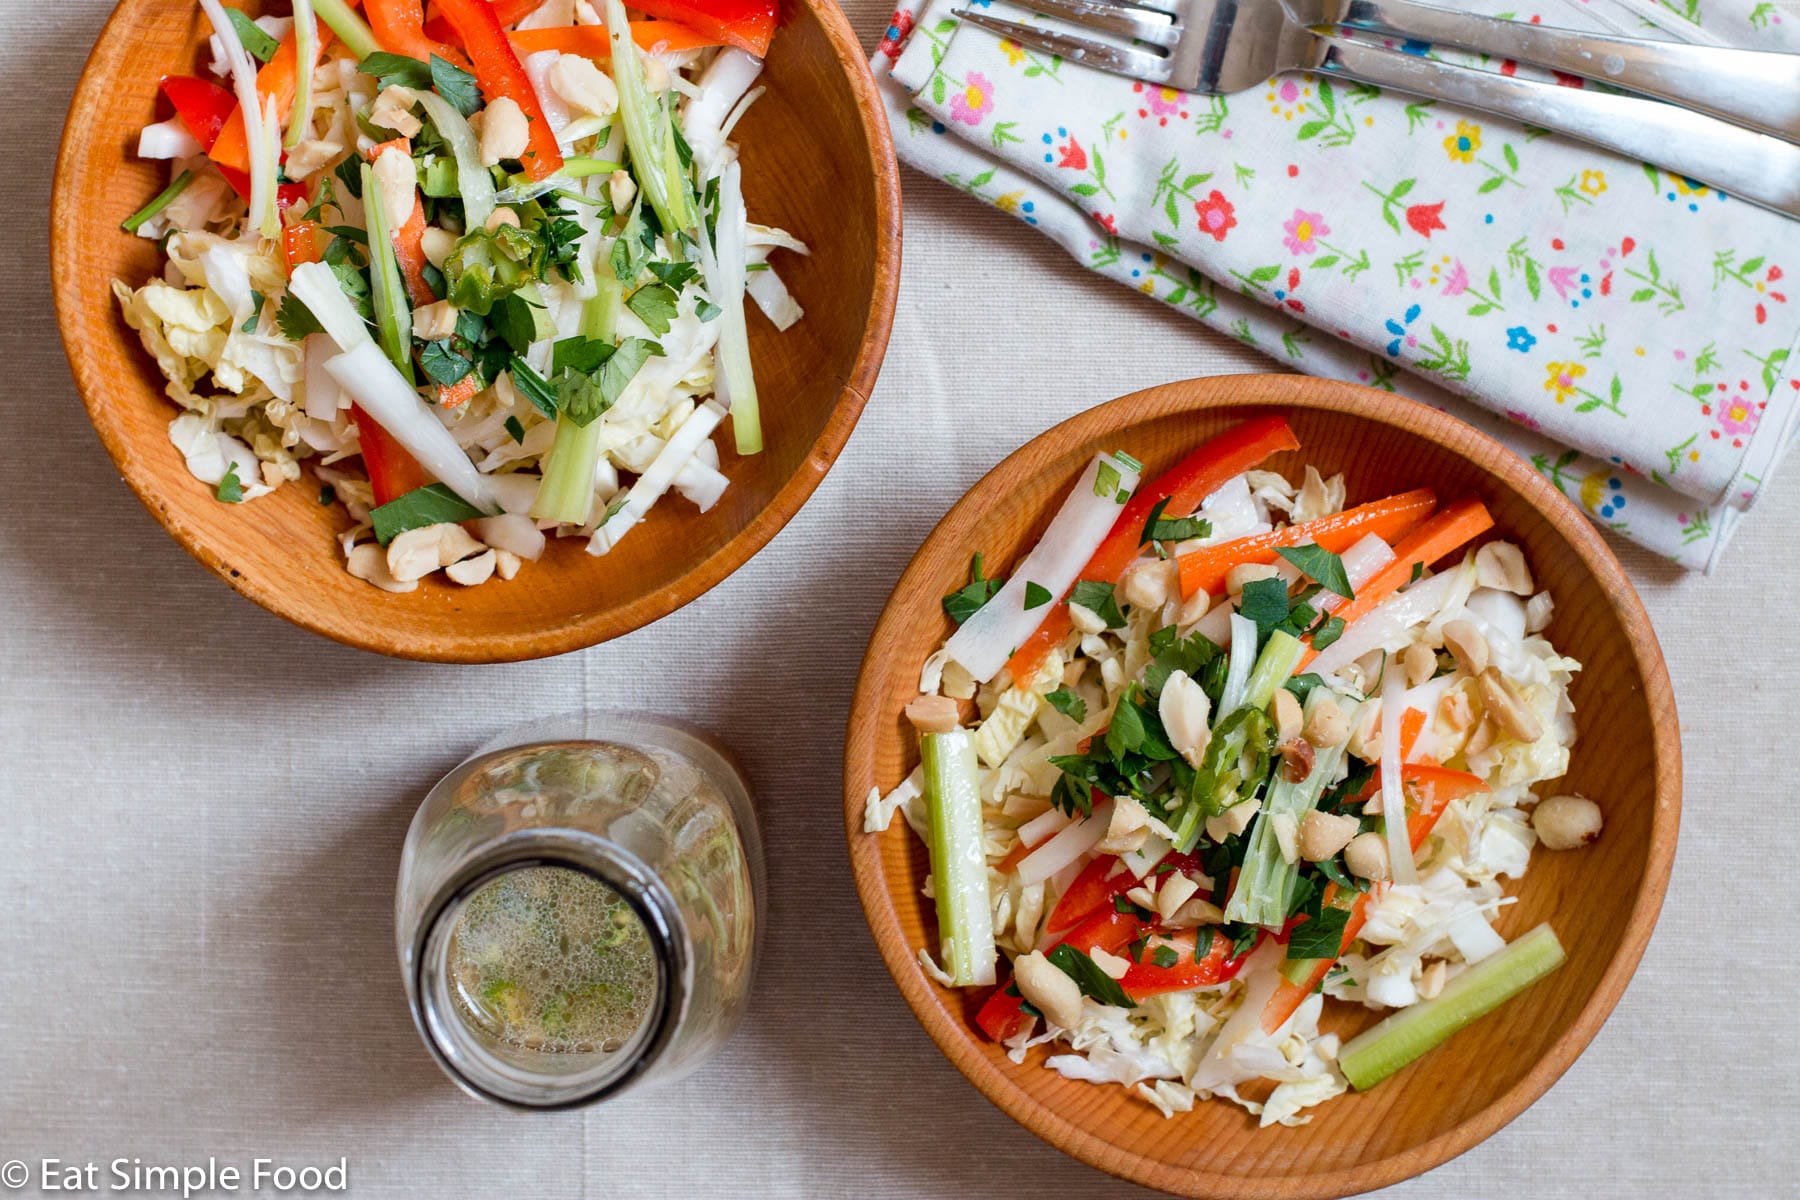 2 wood bowls of cole slaw with sliced red peppers, green onions and celery with cilantro and peanut garnish. Dressing, two forks and napkins in background. Top view.